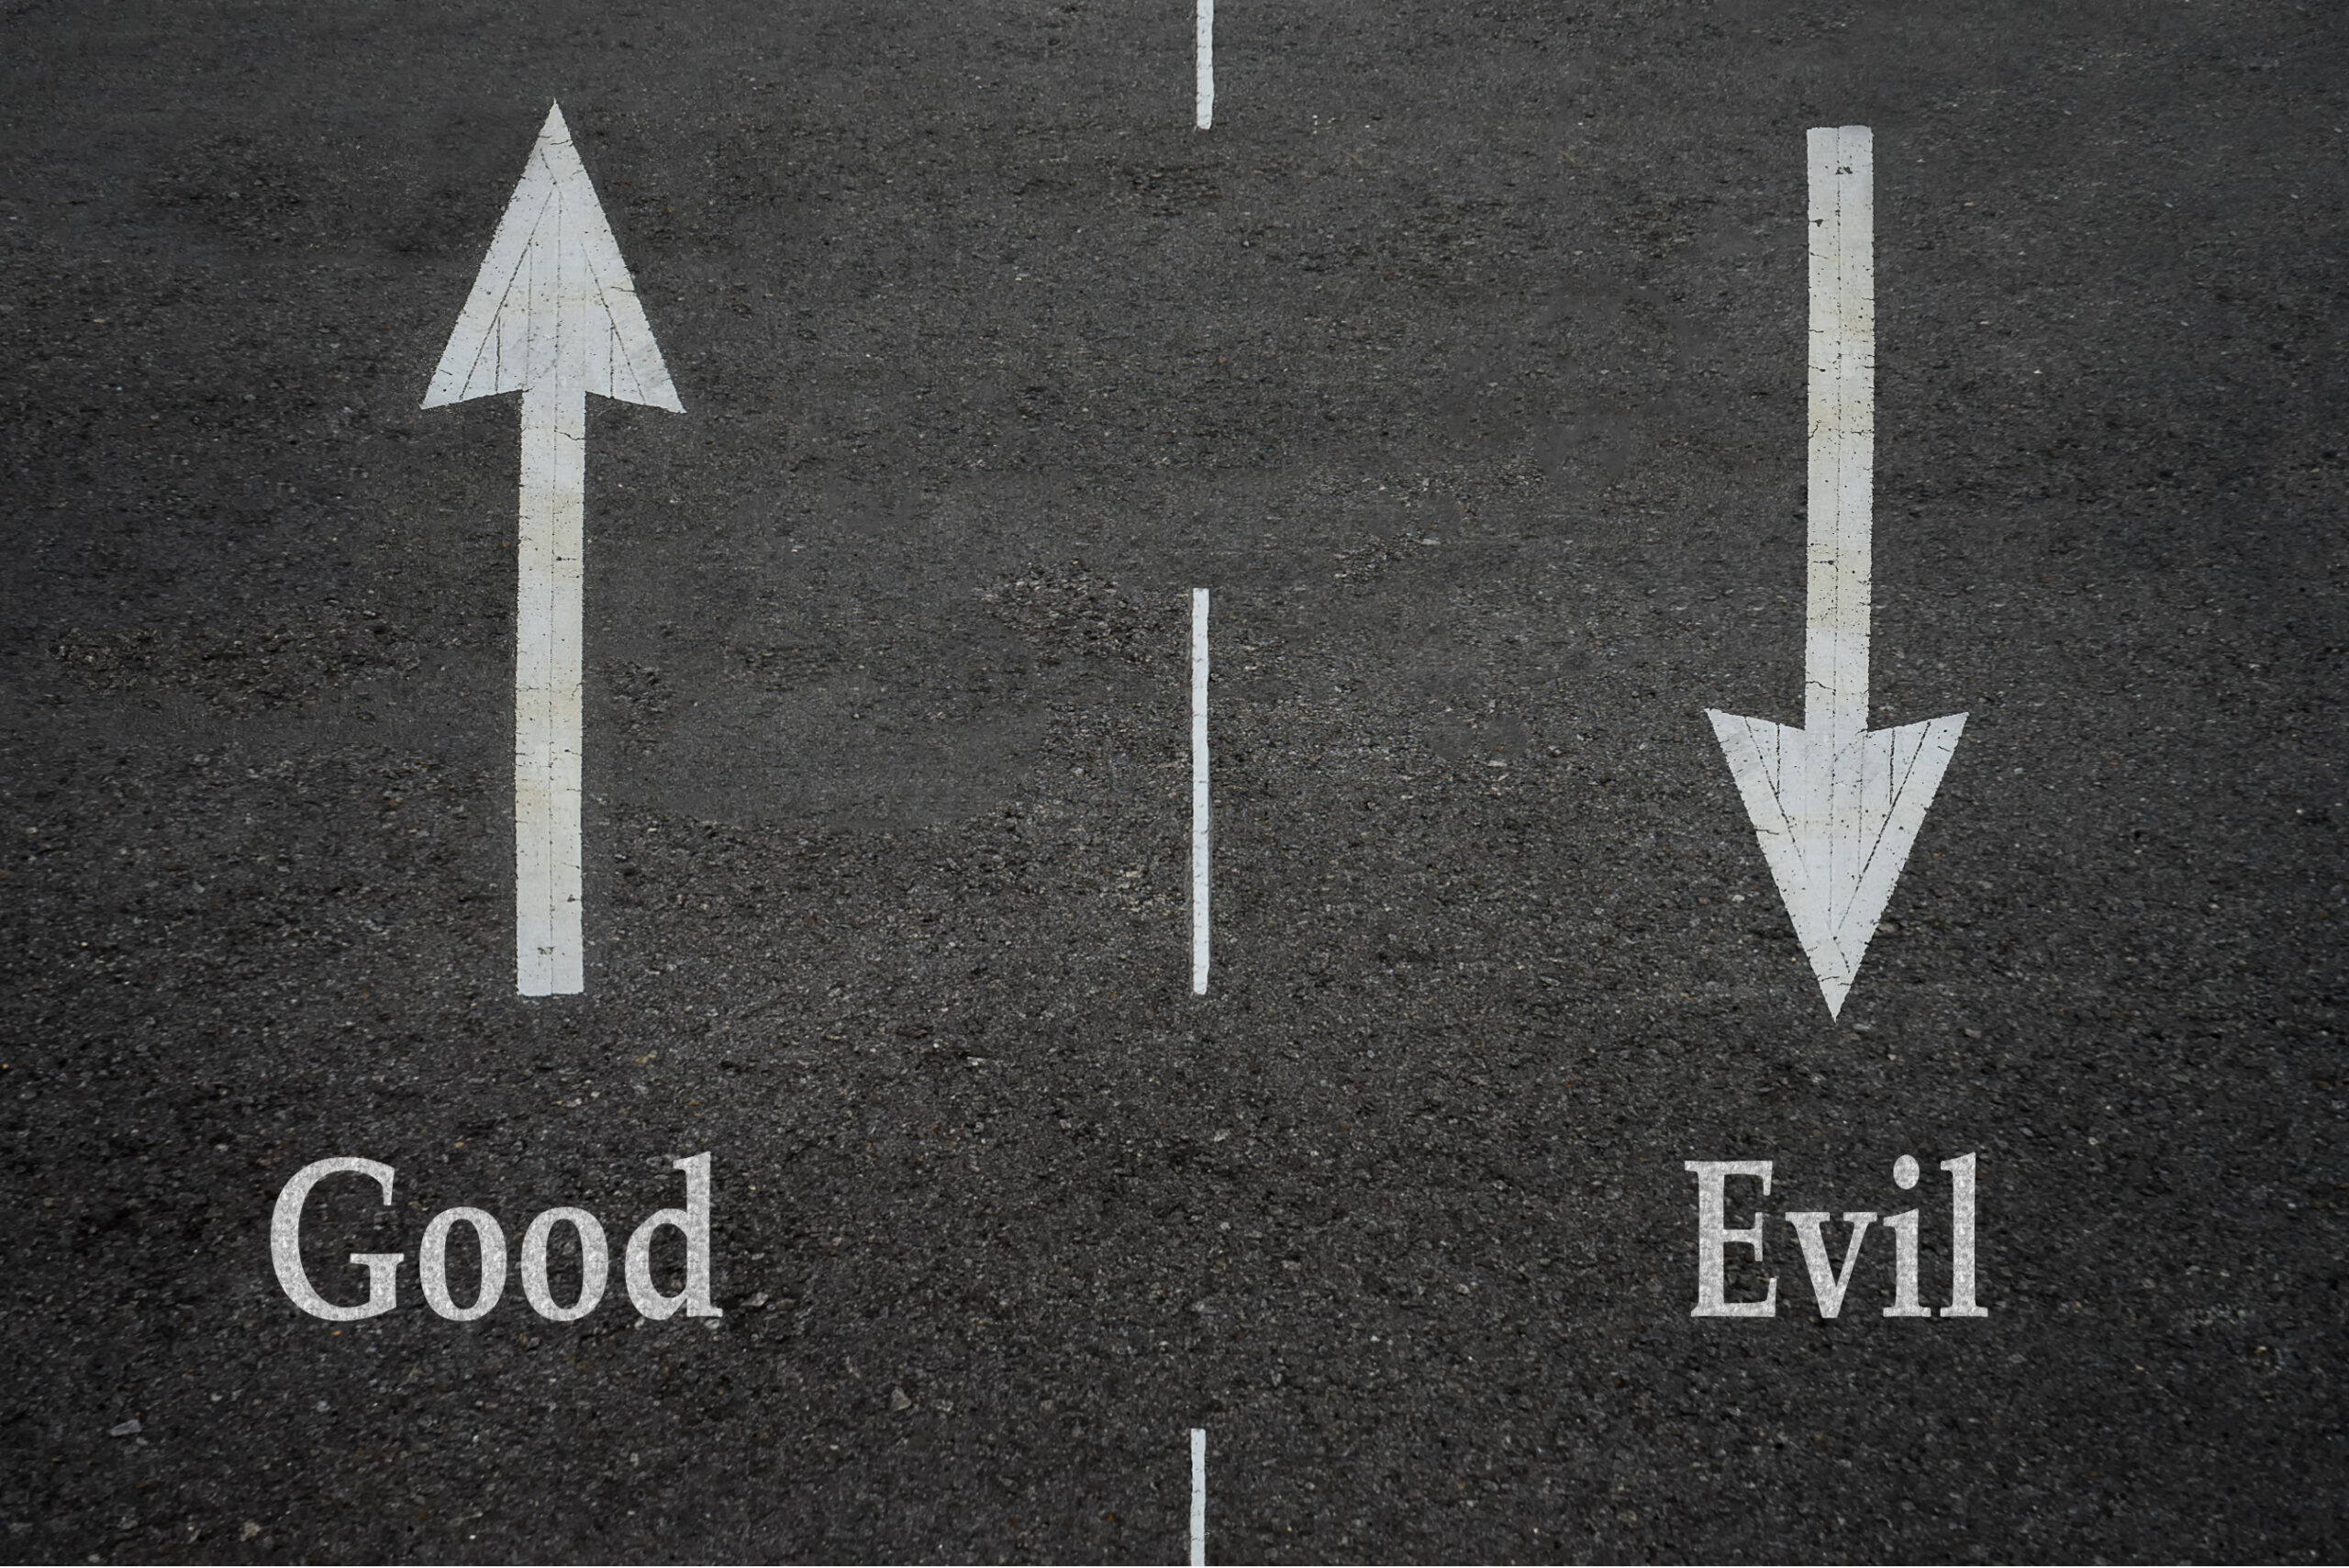 A Two Way Street. Arrow Pointing Up Represents Good, Arrow Pointing Down Represents Evil. Good Seo Practices Like Linkable Assets Make Results Go Up.